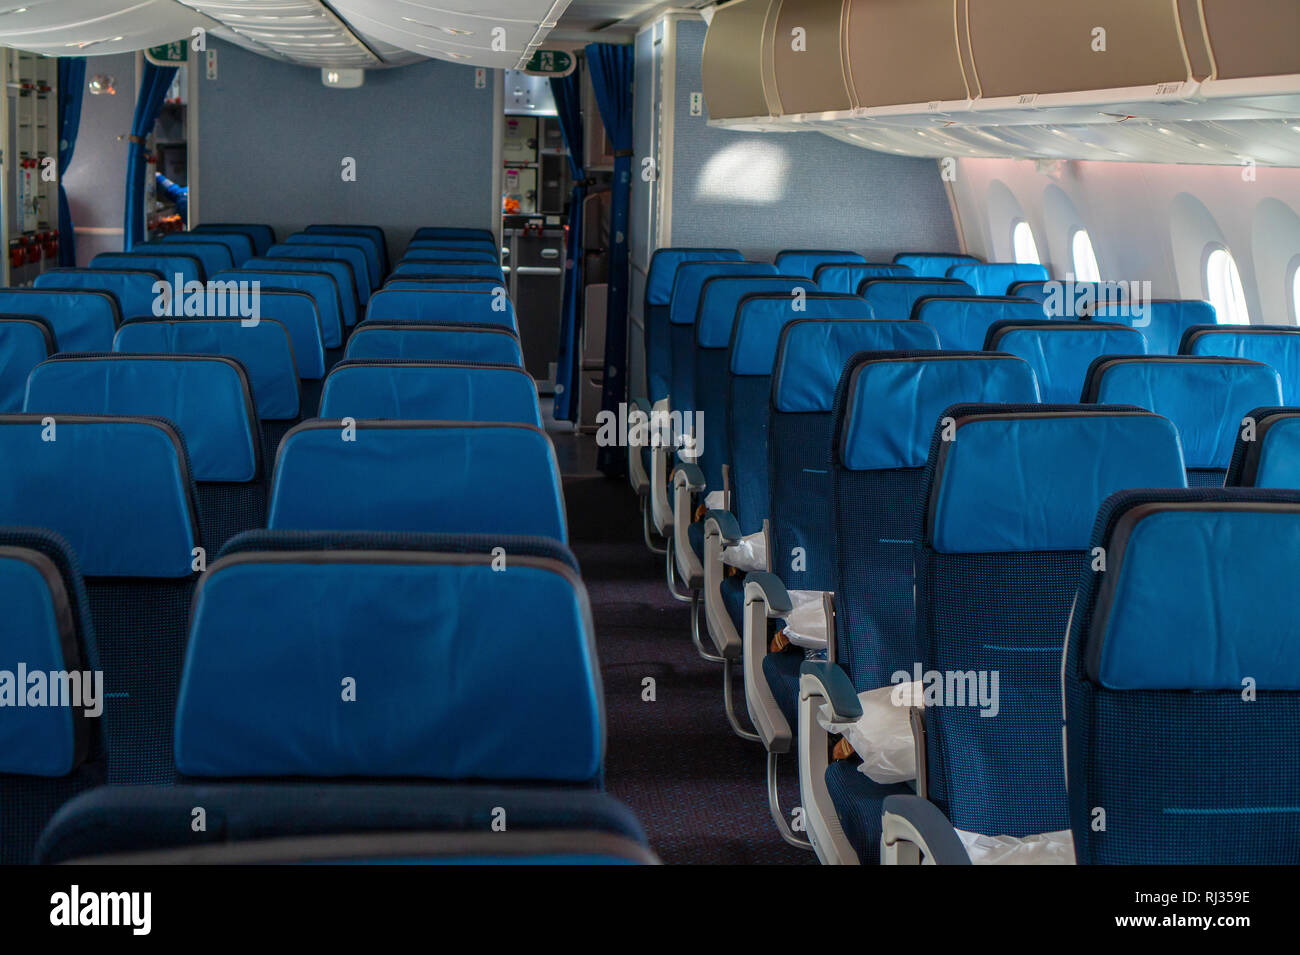 blue empty seats inside an airplane Stock Photo